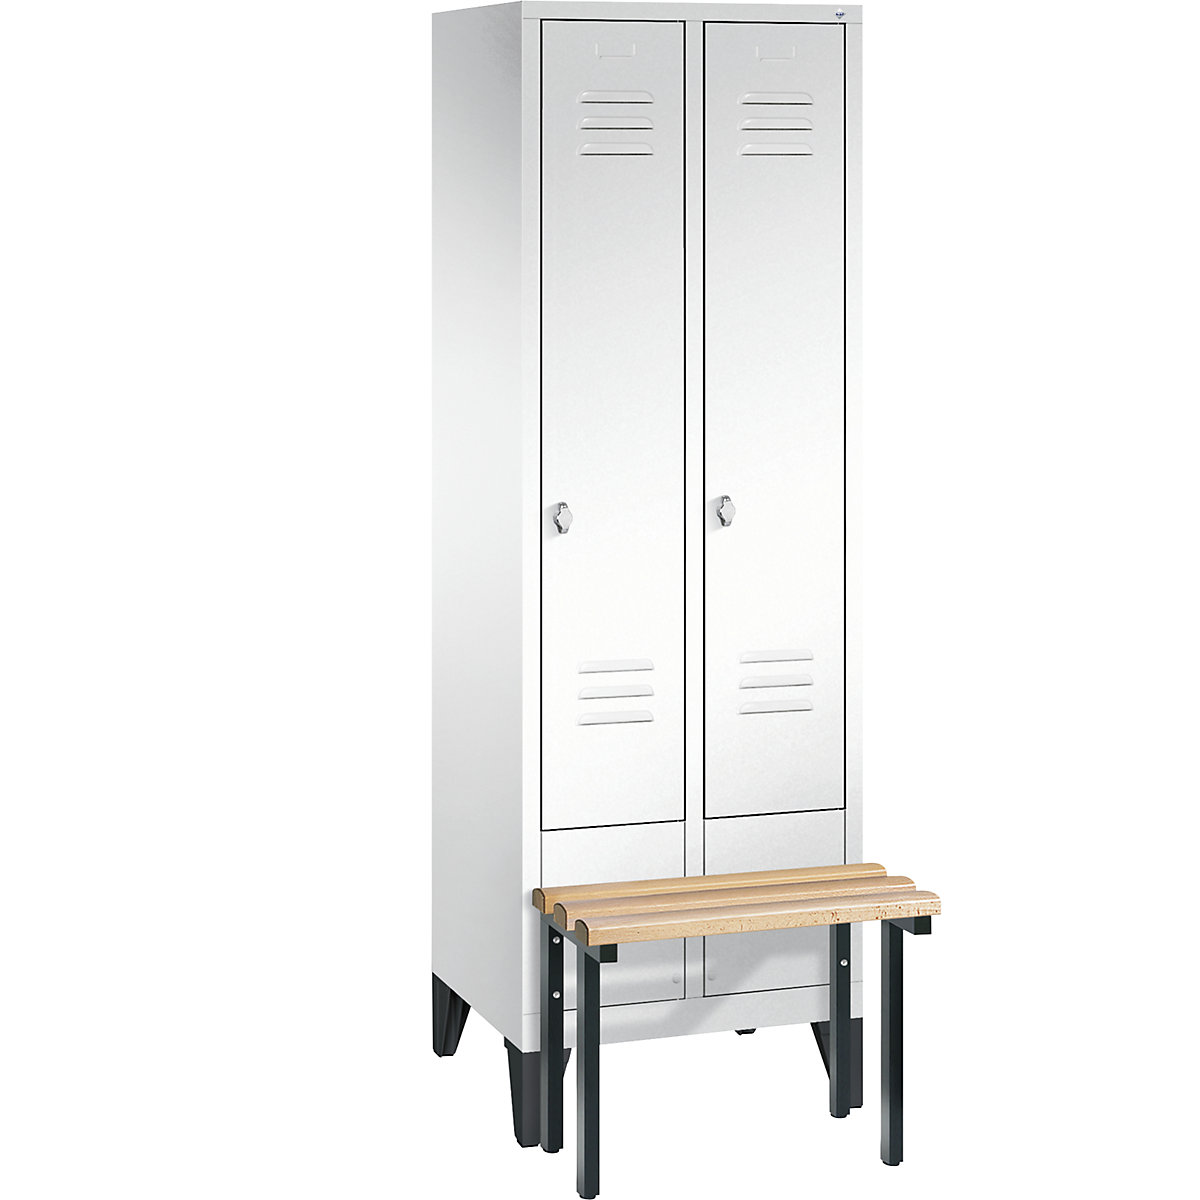 CLASSIC cloakroom locker with bench mounted in front – C+P, 2 compartments, compartment width 300 mm, traffic white-14